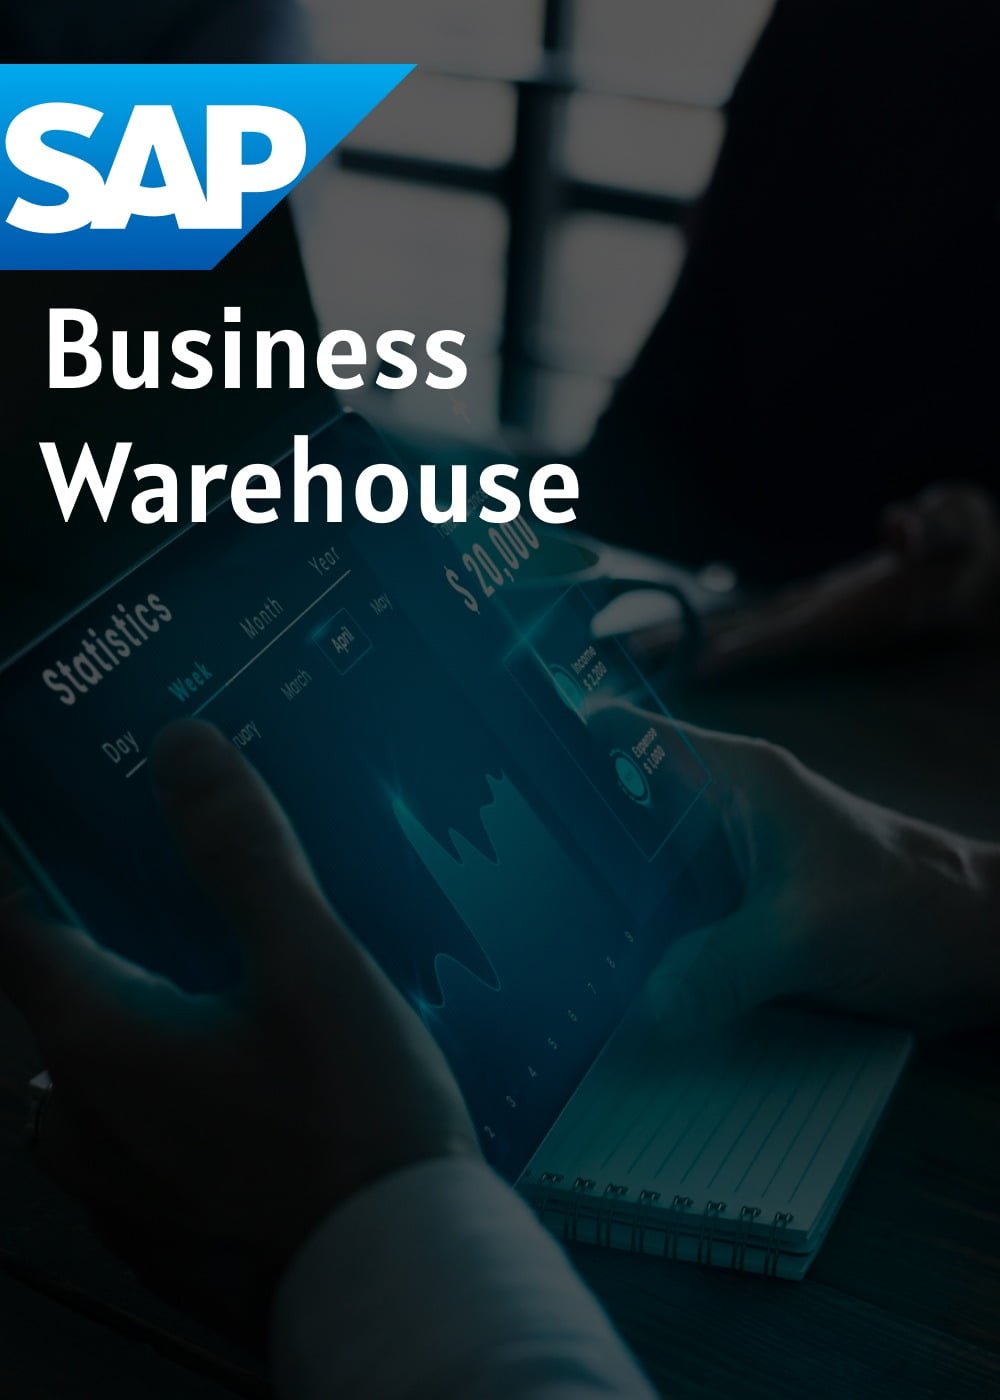 Transform your data into actionable intelligence with SAP BW. We focus on designing robust data warehousing solutions that enable seamless integration, efficient data modeling, and enhanced reporting. Now you can stay ahead in the competitive landscape with our expert guidance on SAP BW implementation.